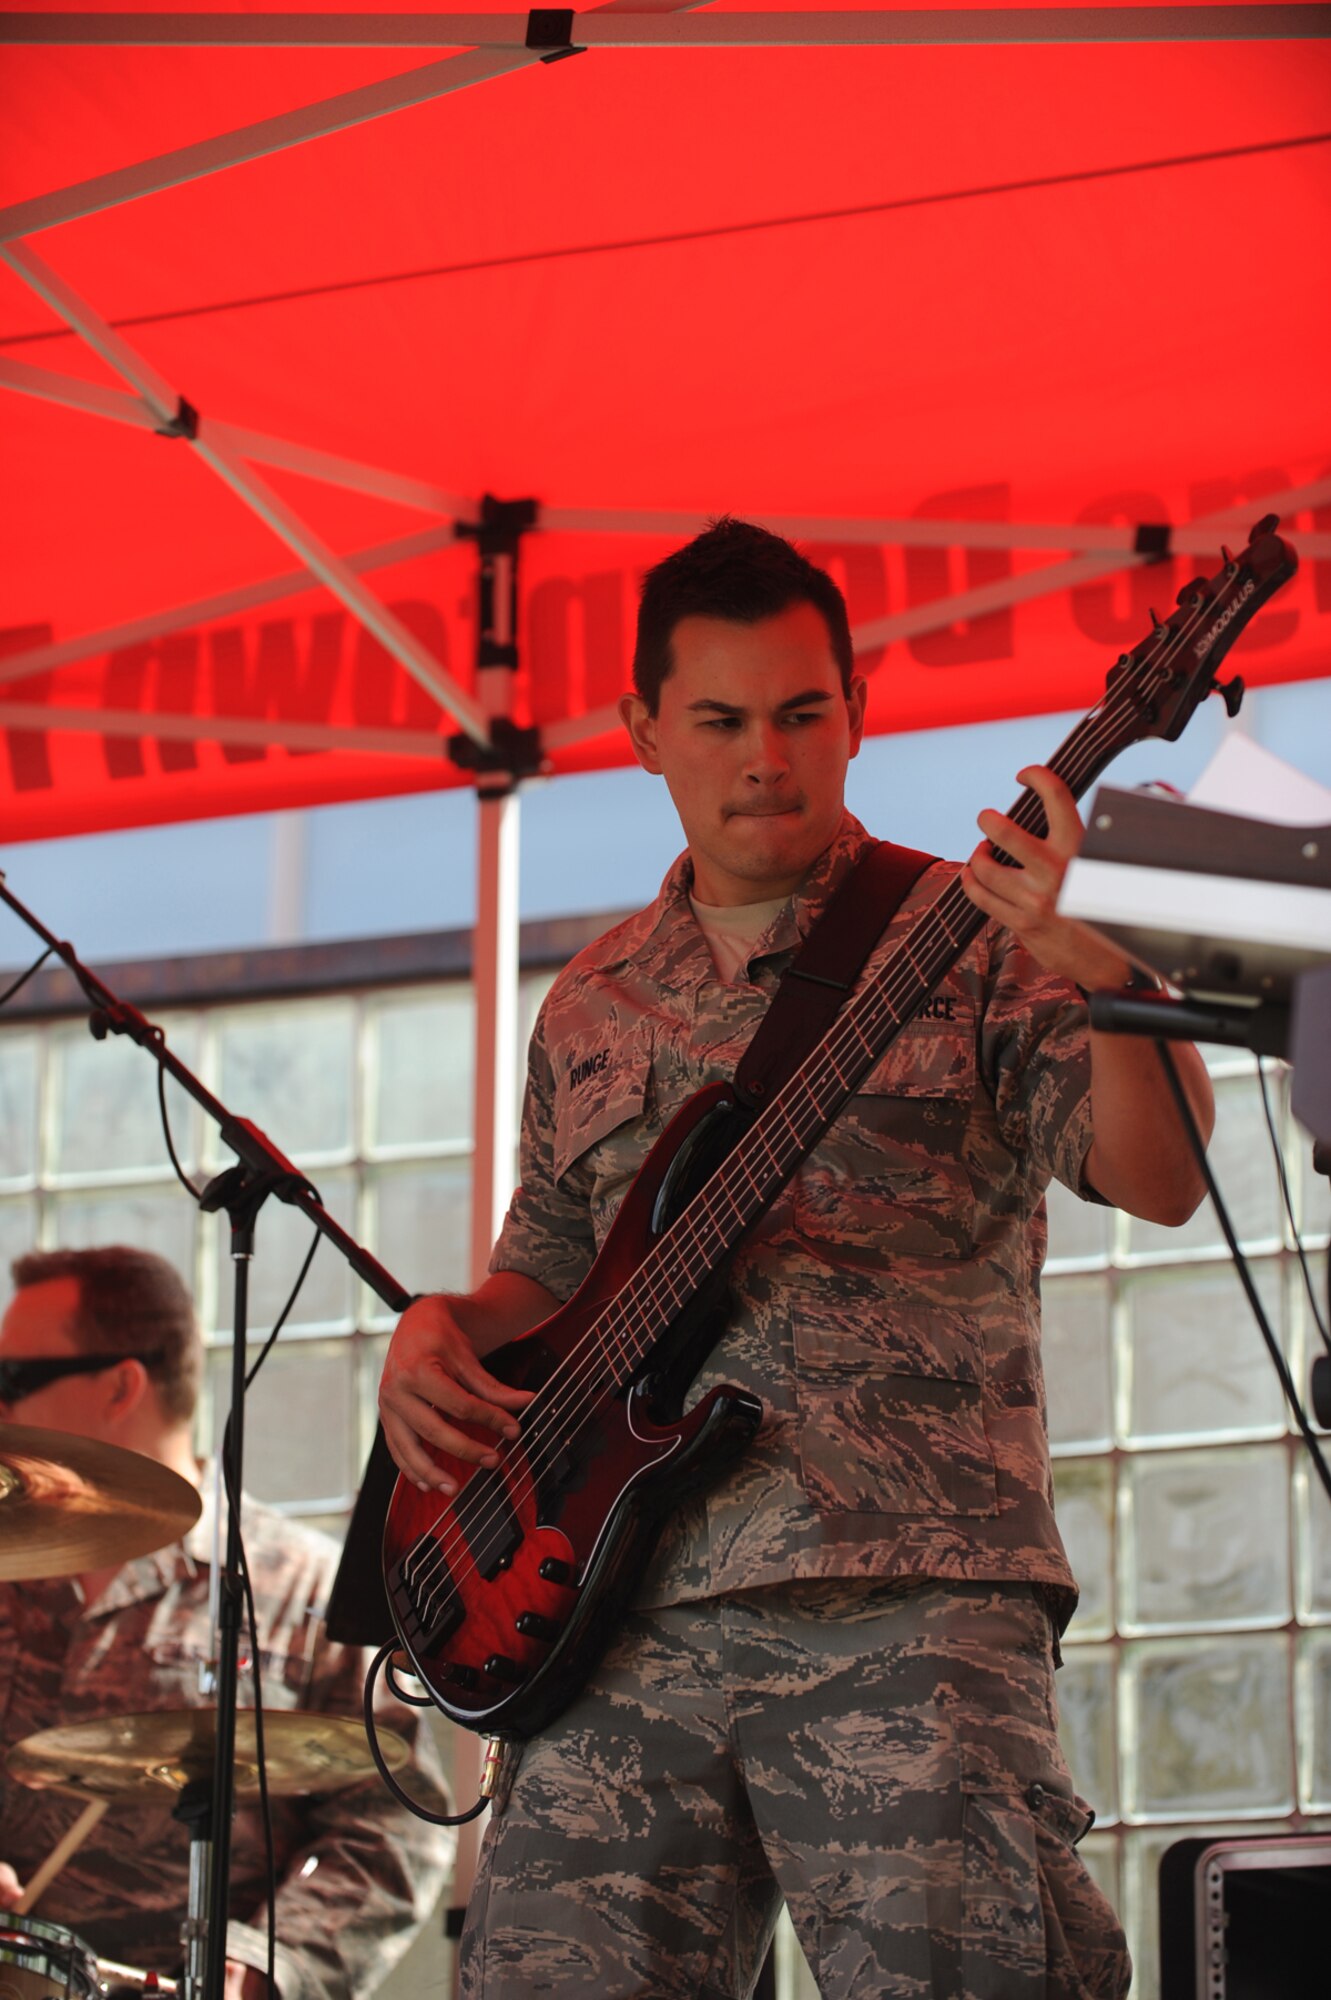 Airman 1st Class Philip Runge, bass player for the Air Force Band of the
Pacifi c’s rock band Top Cover, performs for the crowd following the Hero Games in
downtown Anchorage, Alaska, June 18. (U.S. Air Force photo\Steve White)